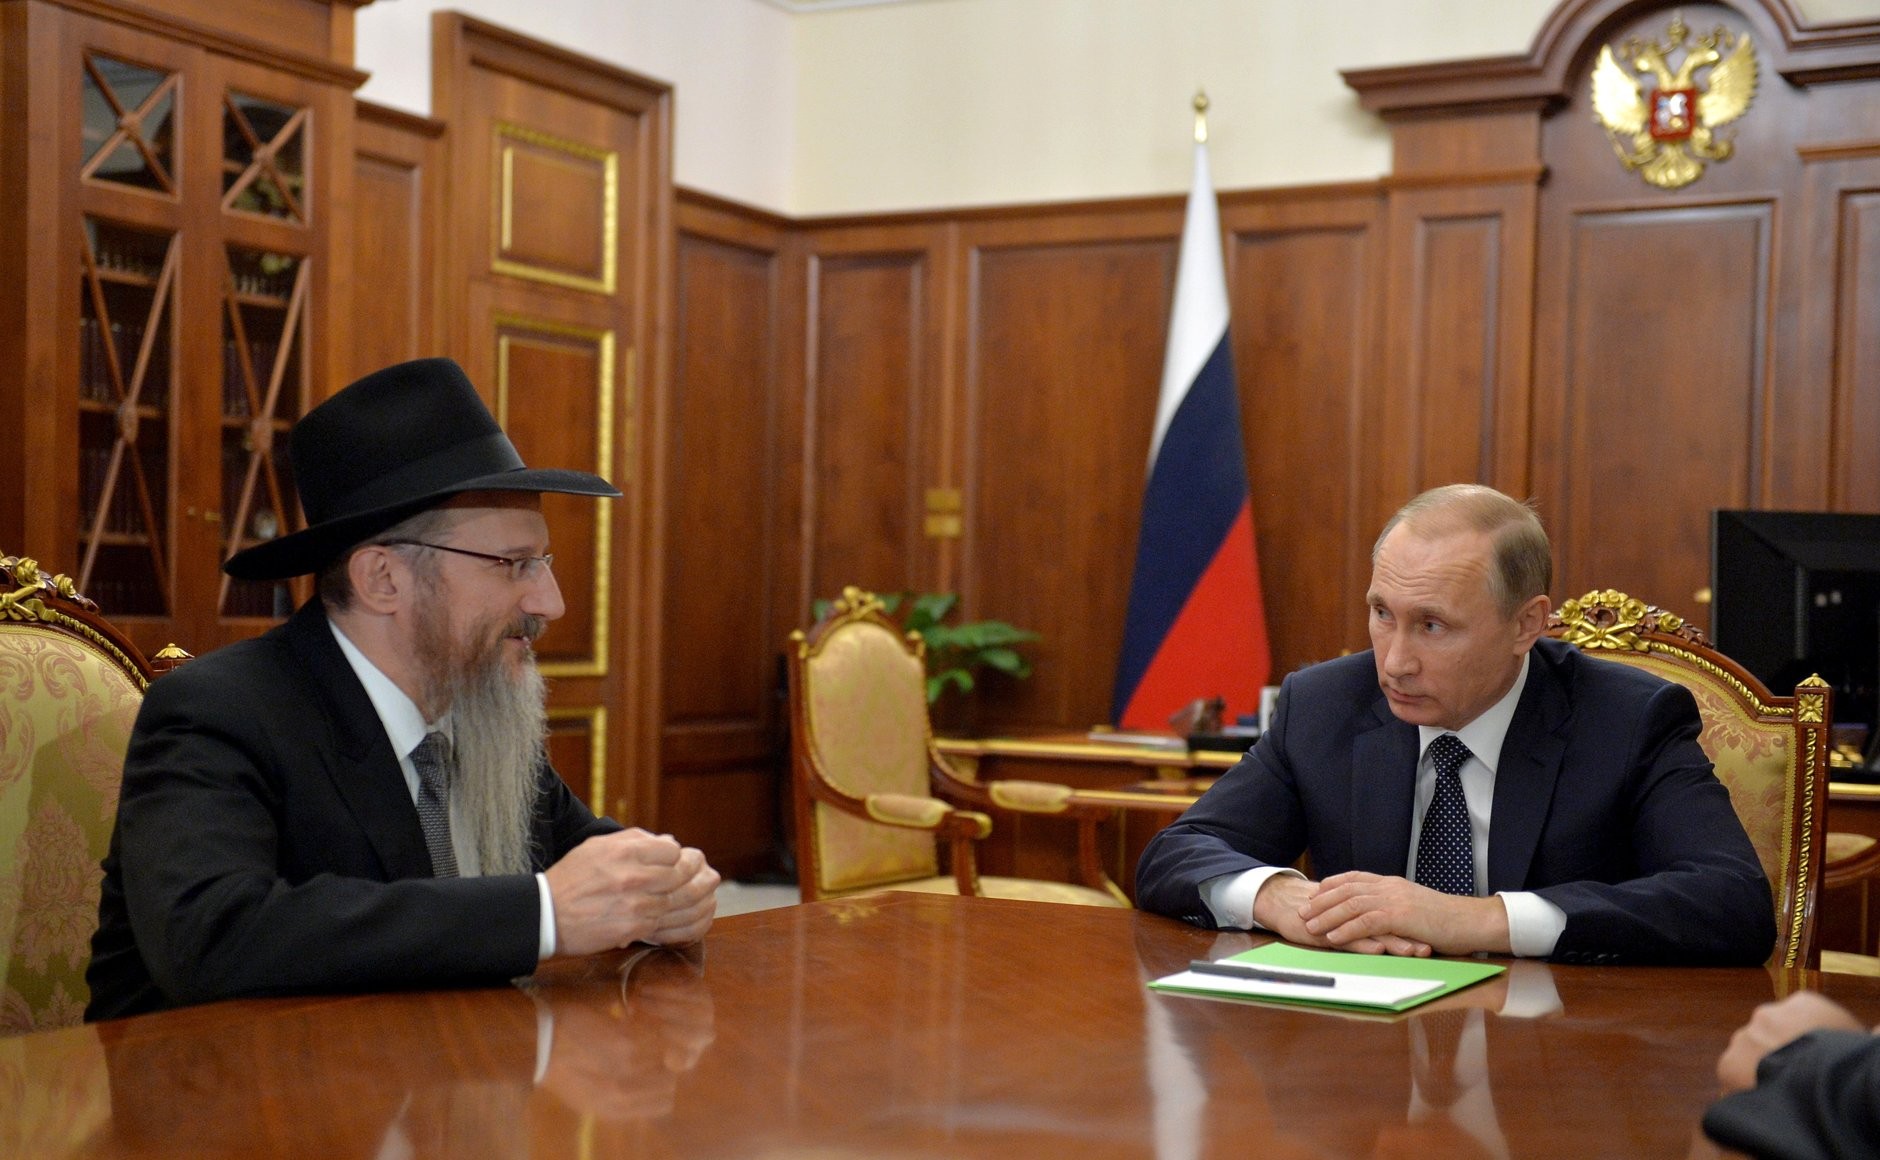 Chief Rabbi of Russia calls on Moscow to denounce official’s ‘vulgar’ anti-Semitism